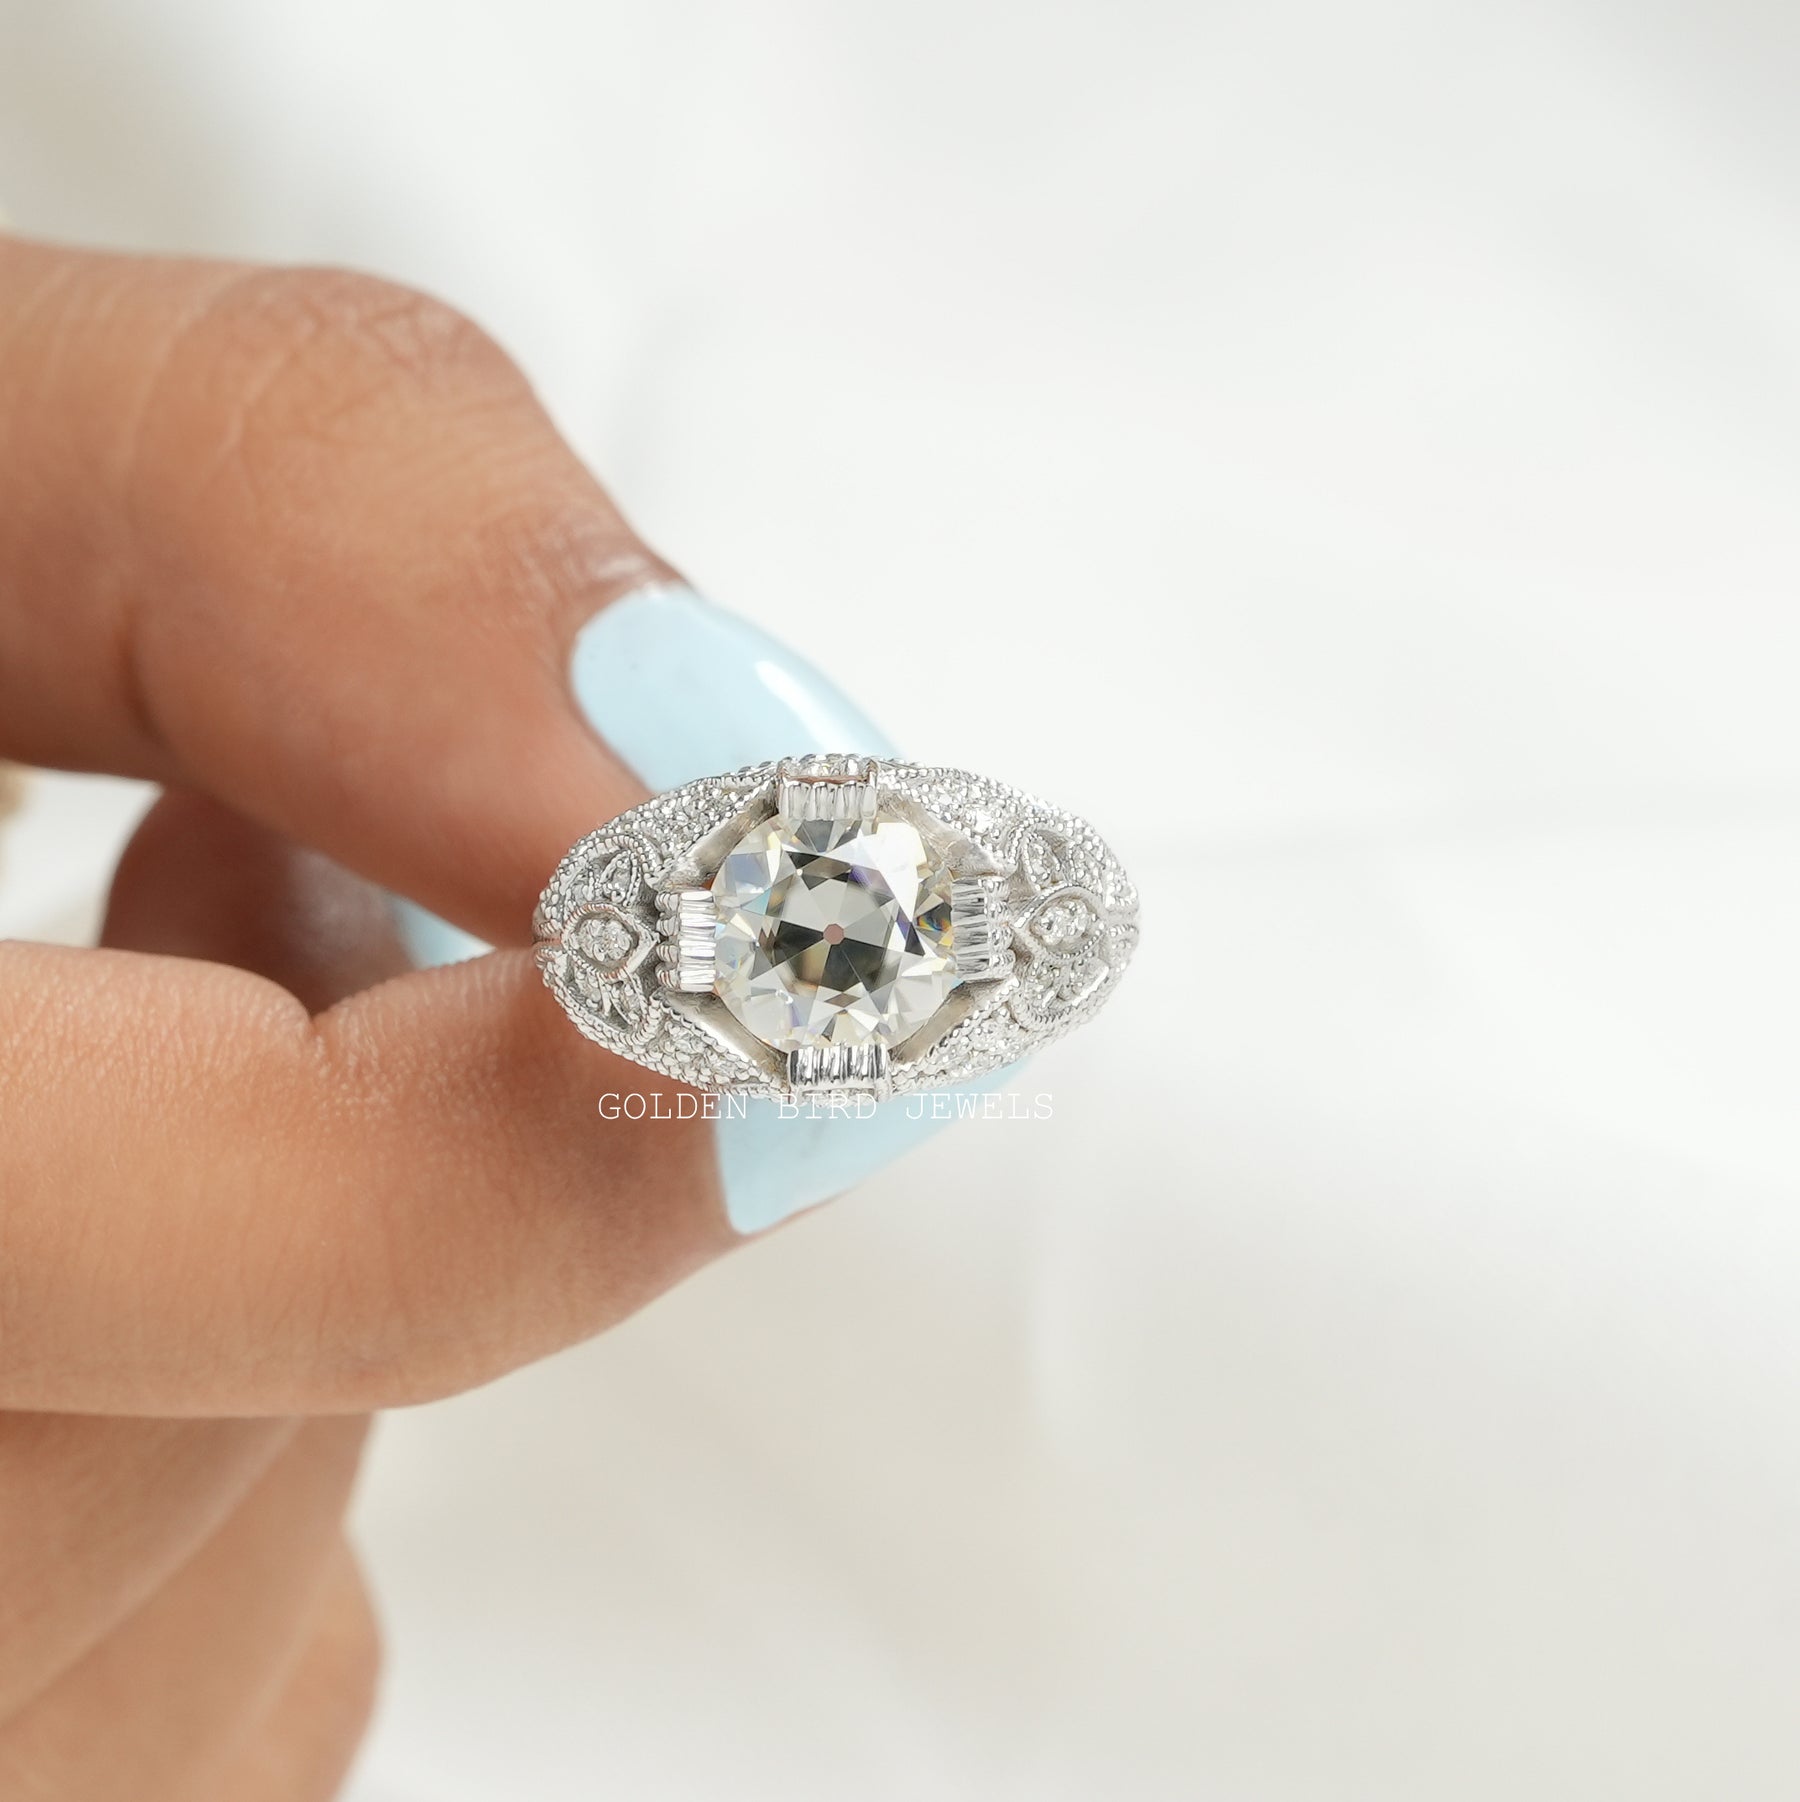 [This rmoissanite ring set in oec round cut stone with prong setting]-[Golden Bird Jewels]